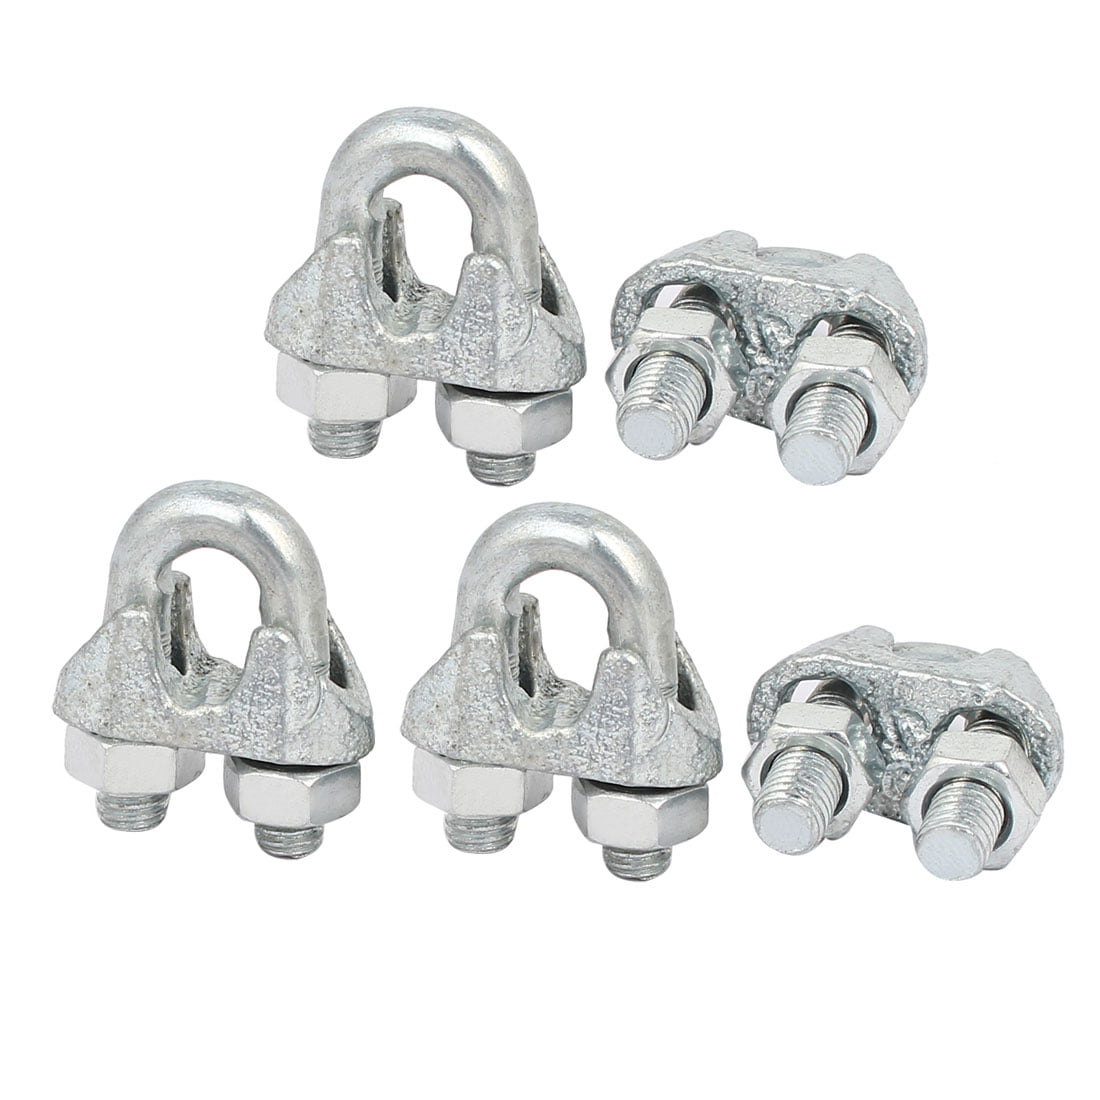 M5 5mm 3/16" Metal Wire Rope Saddle Cable Clamps Clips 20PCS Silver Tone 709874264470 